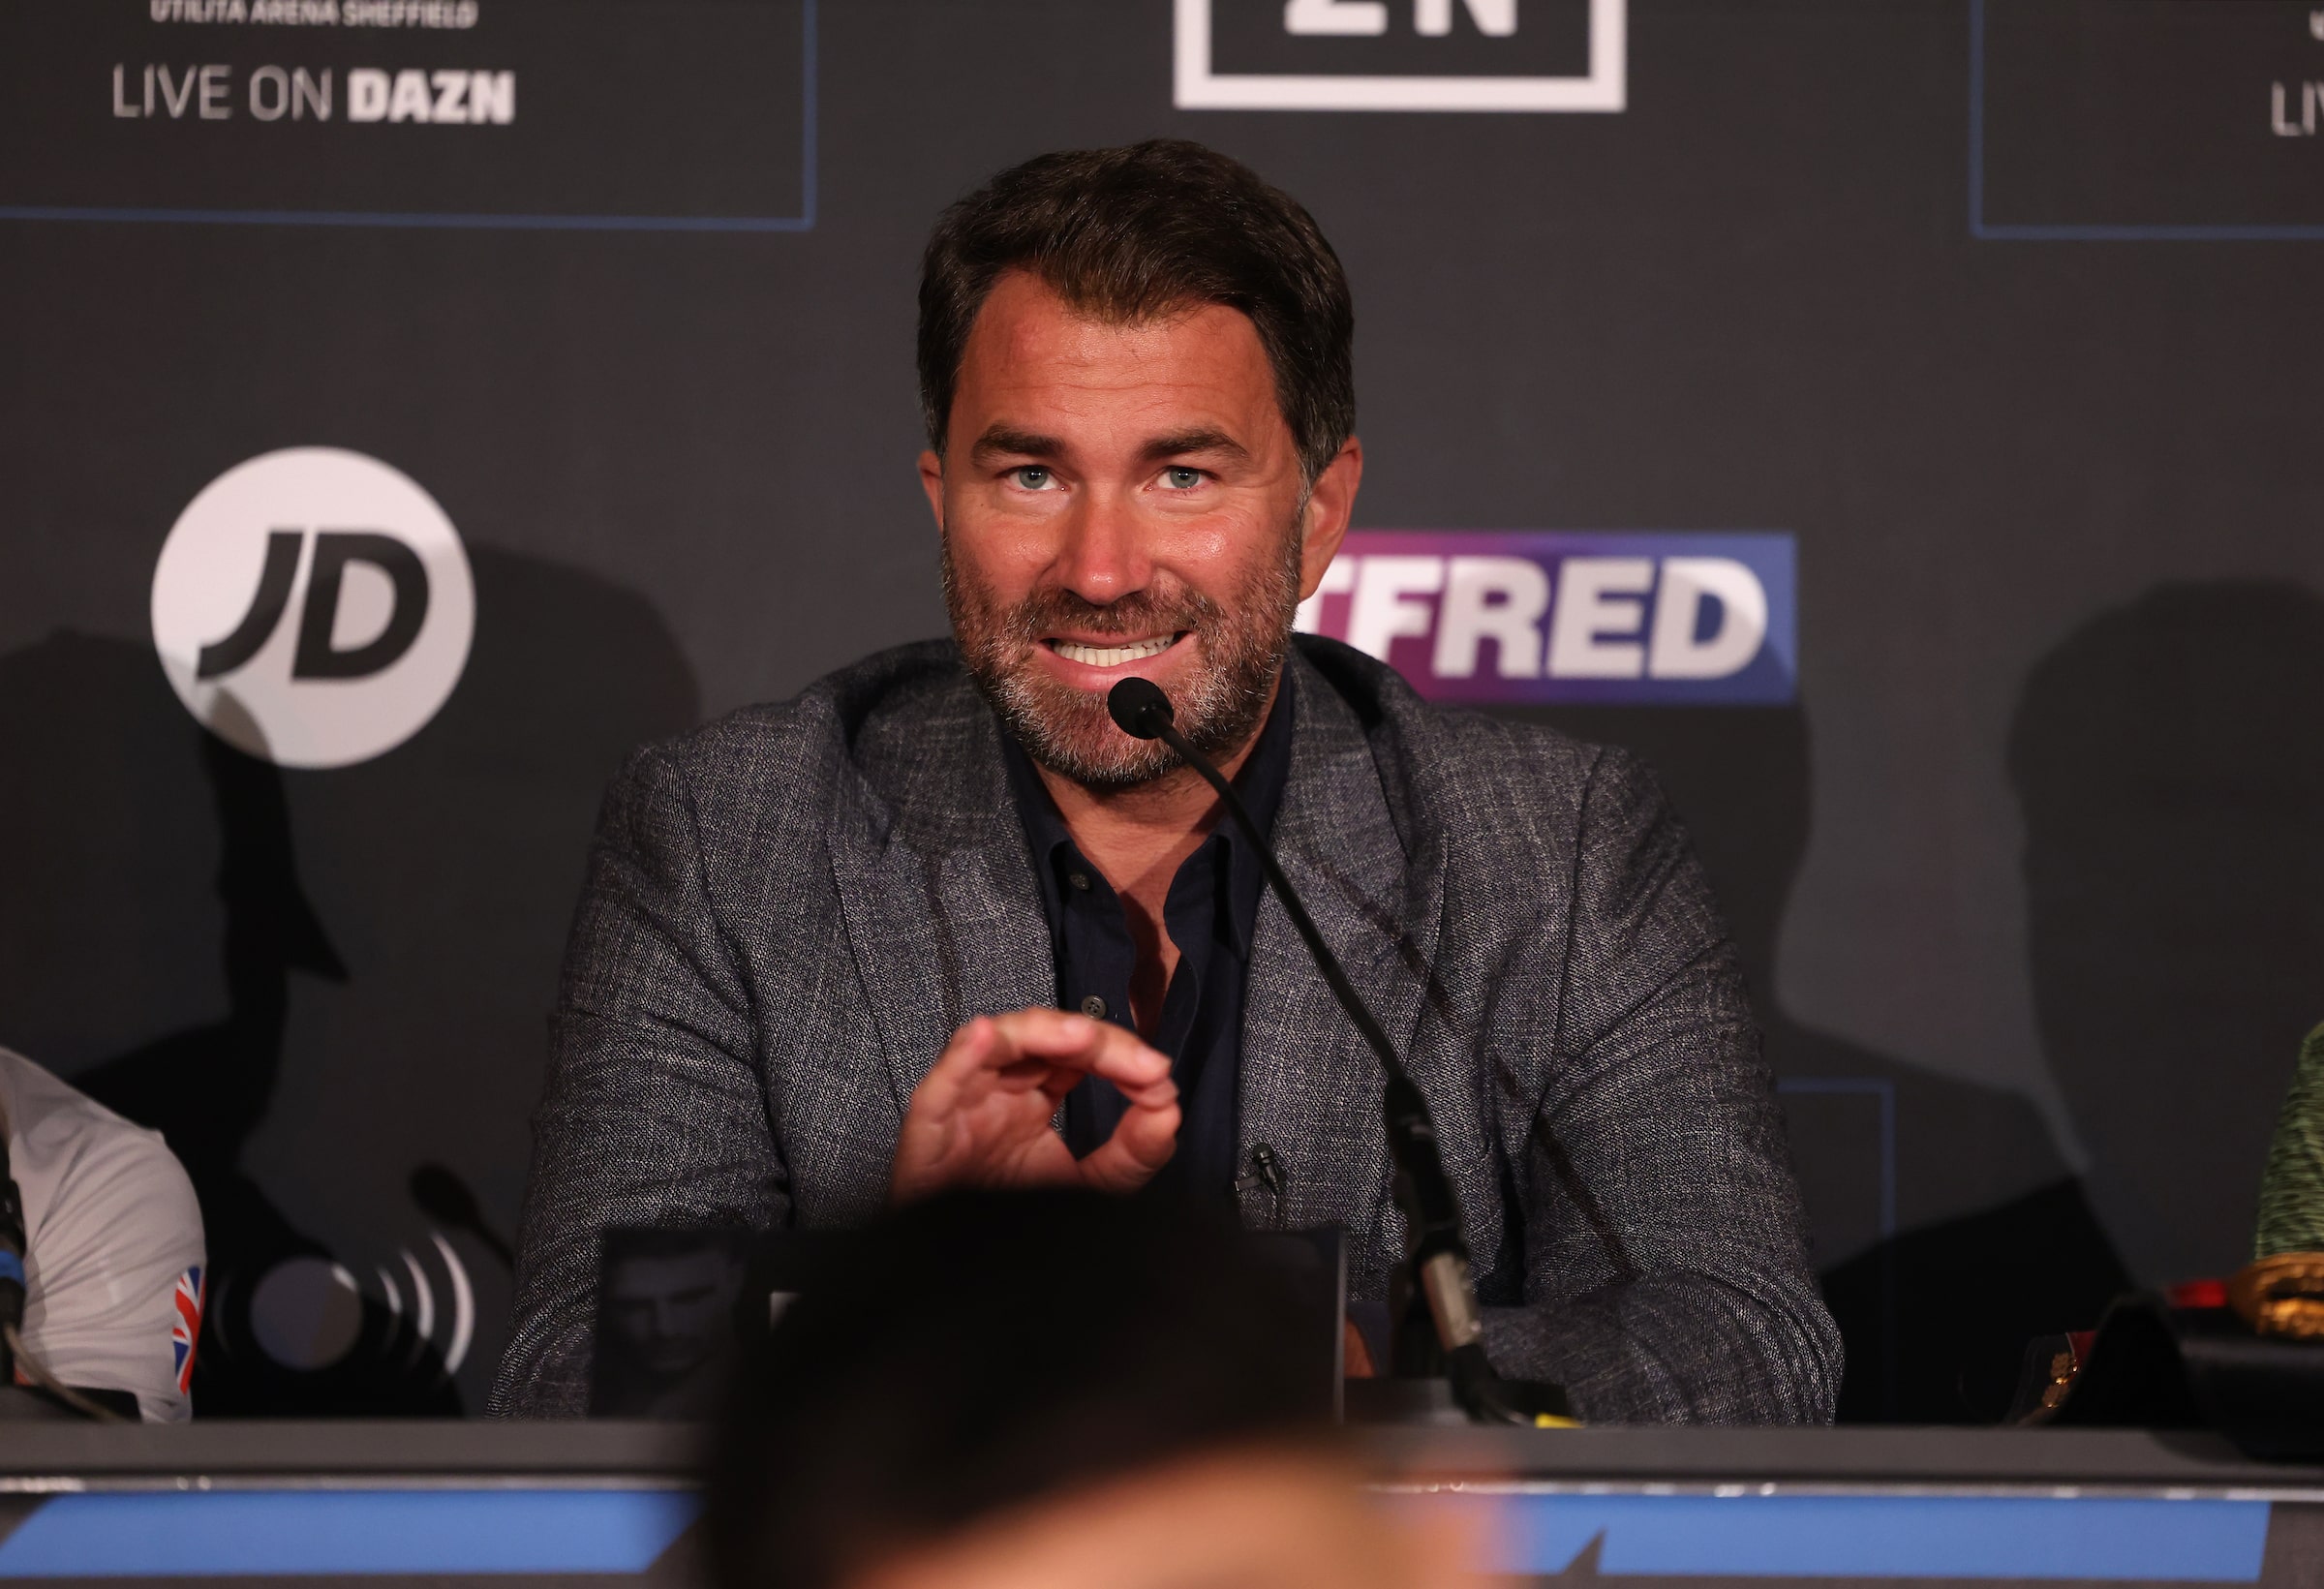 Eddie Hearn: "I am shocked that Whyte has signed to fight AJ & If AJ loses, Saudi deal is off the table"